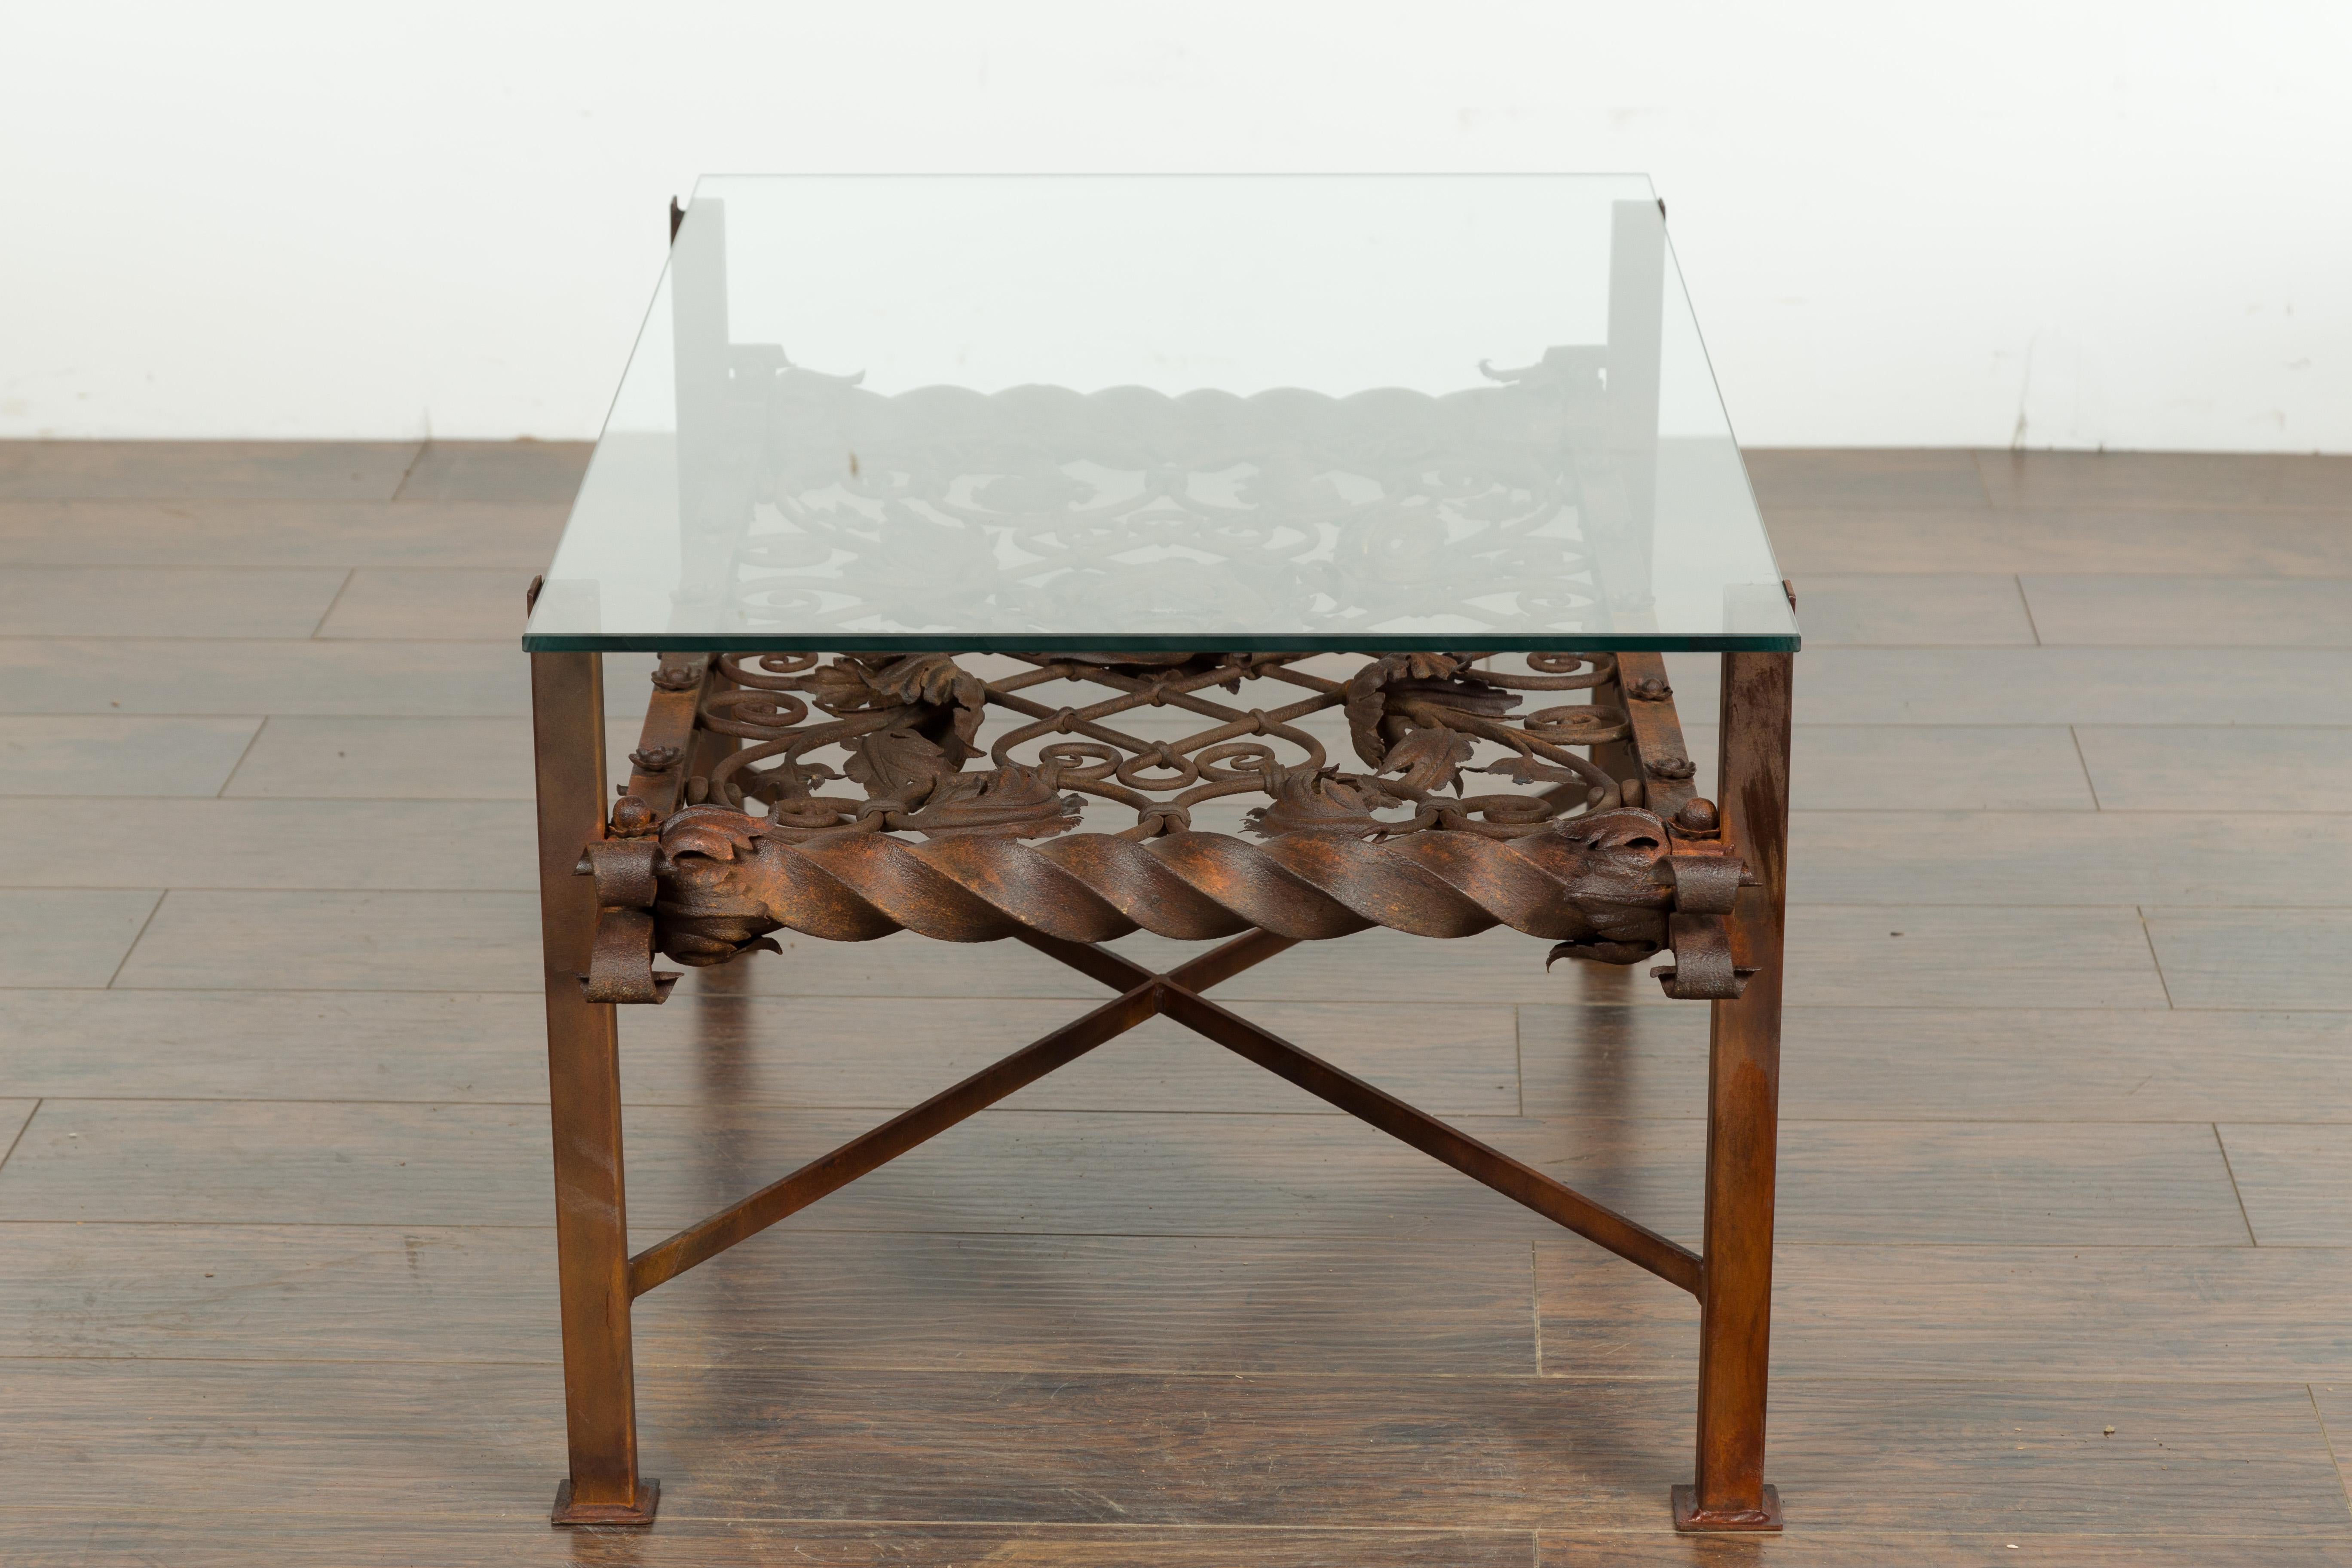 French 1892 Iron Balcony Fragment Made into a Coffee Table with Glass Top For Sale 4